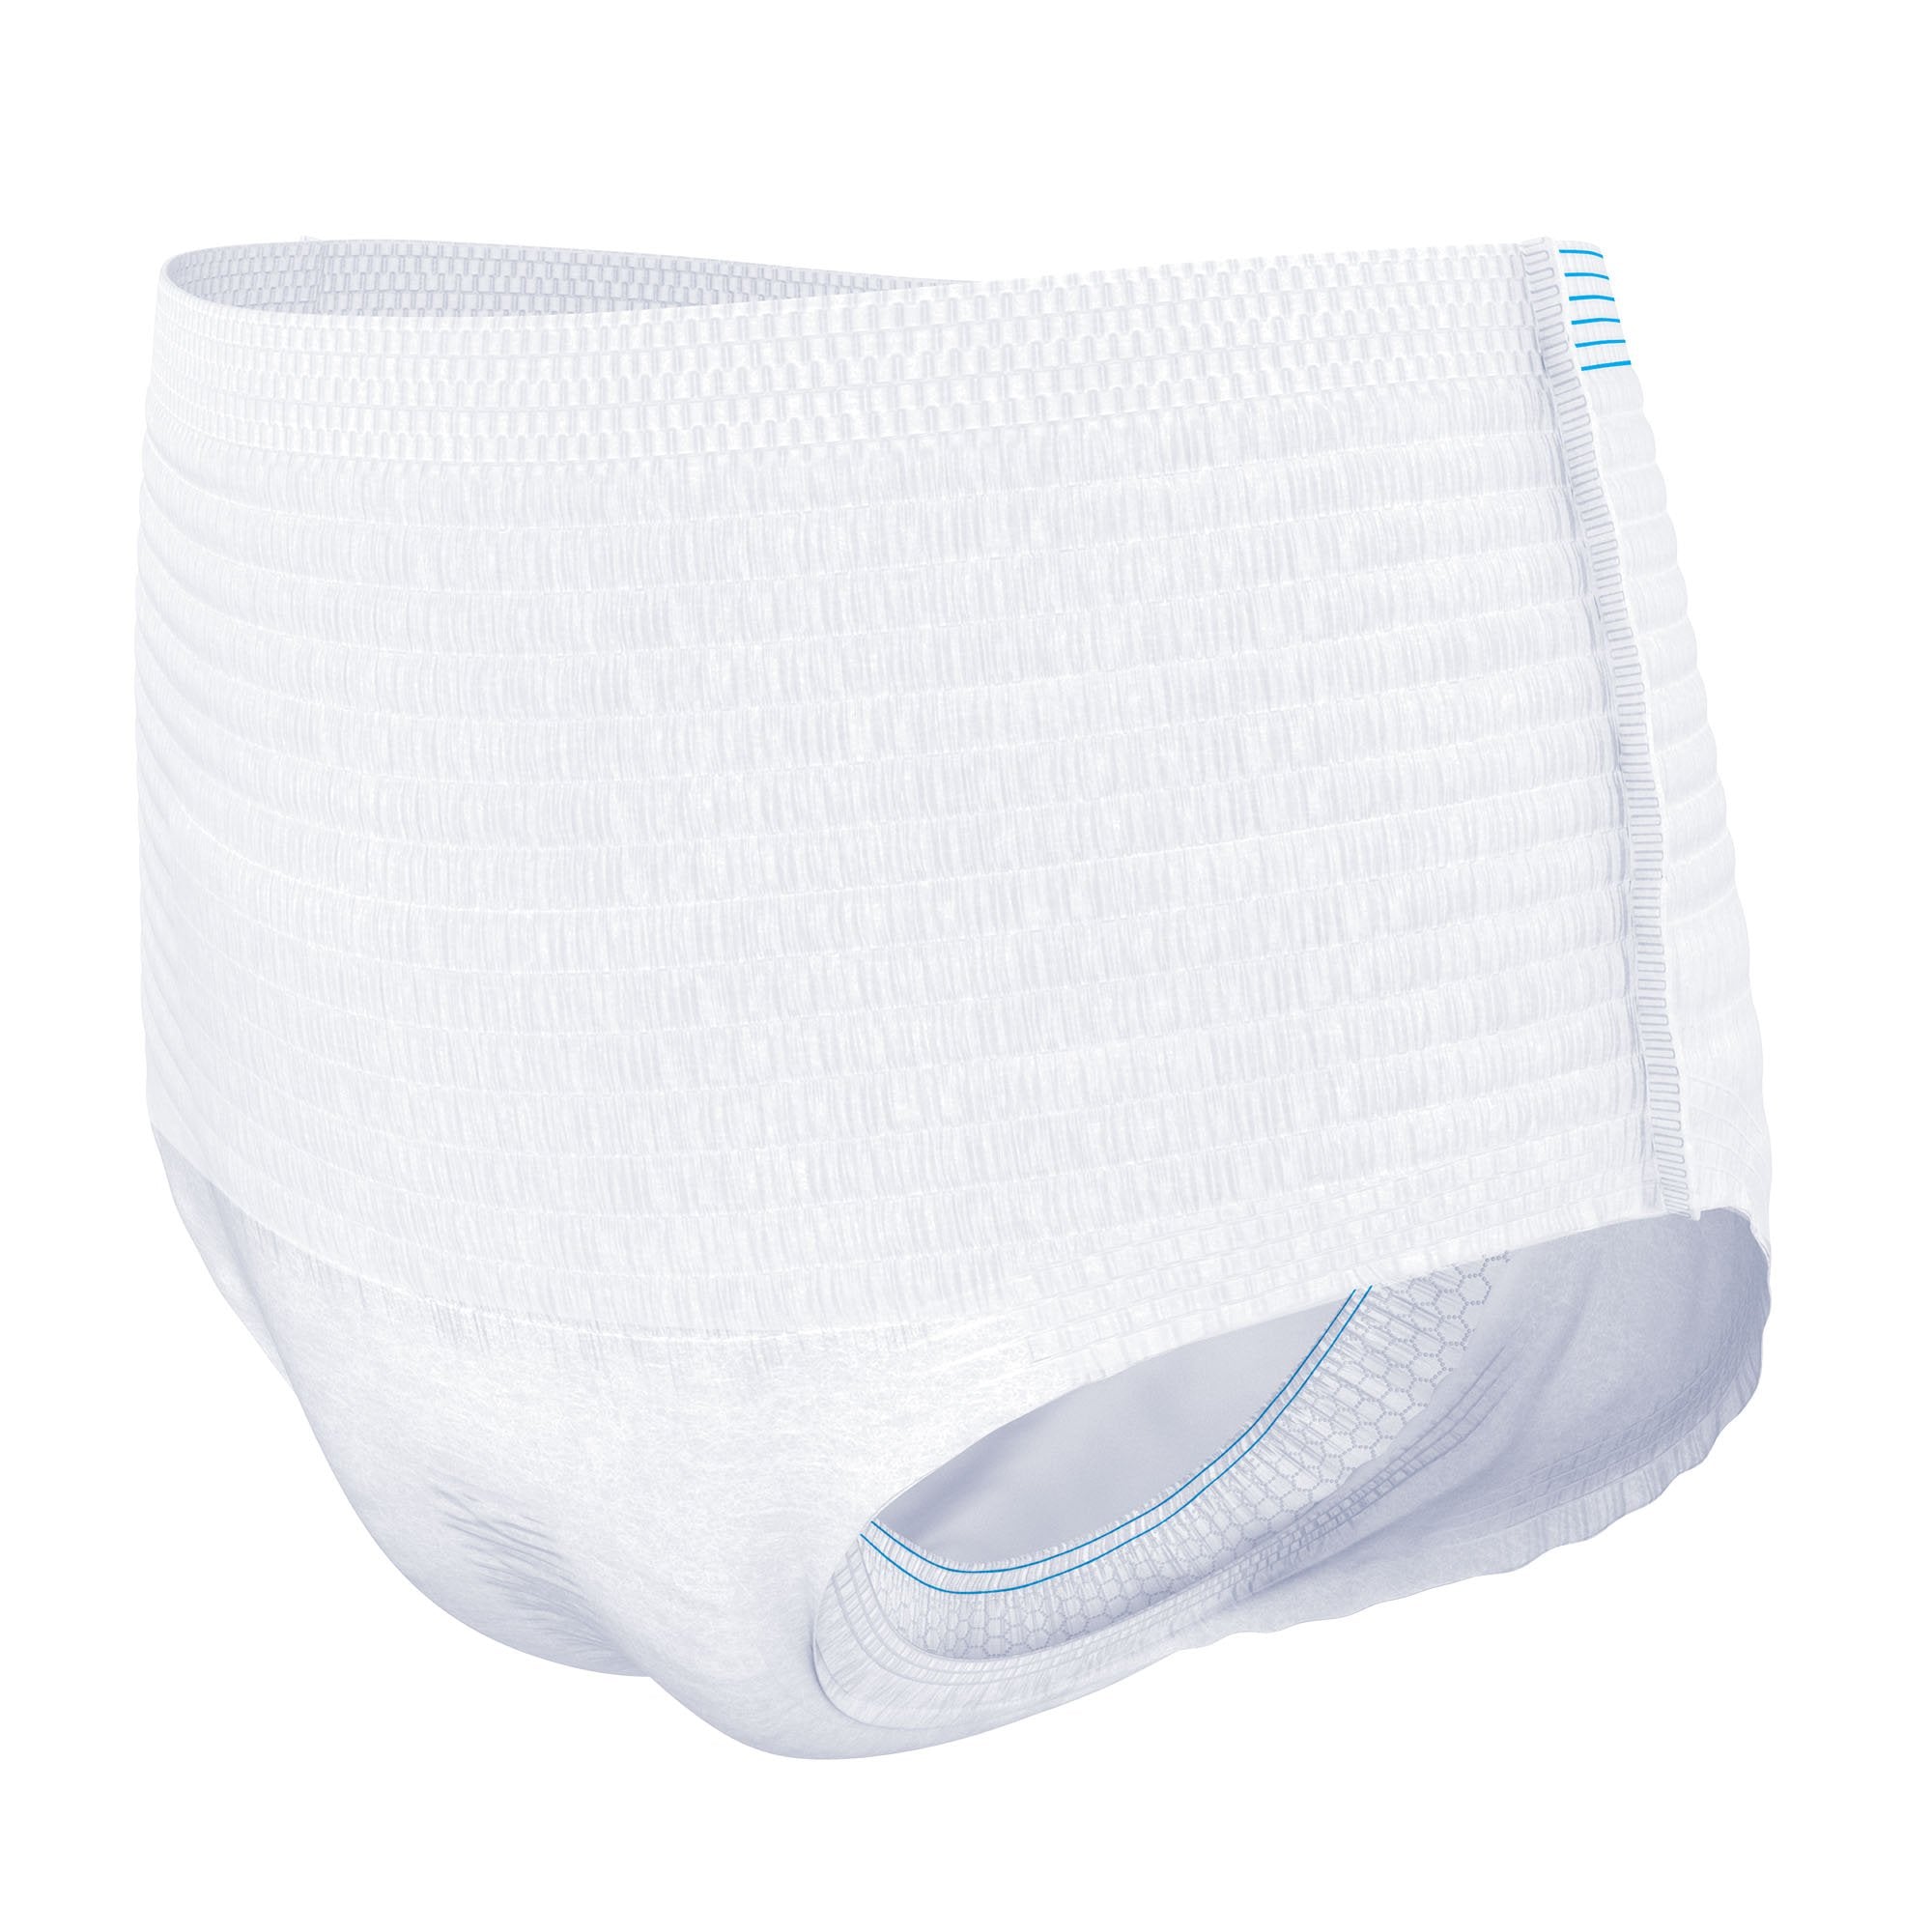 Unisex Adult Absorbent Underwear TENA ProSkin Extra Protective Pull On with Tear Away Seams 2X-Large Disposable Moderate Absorbency